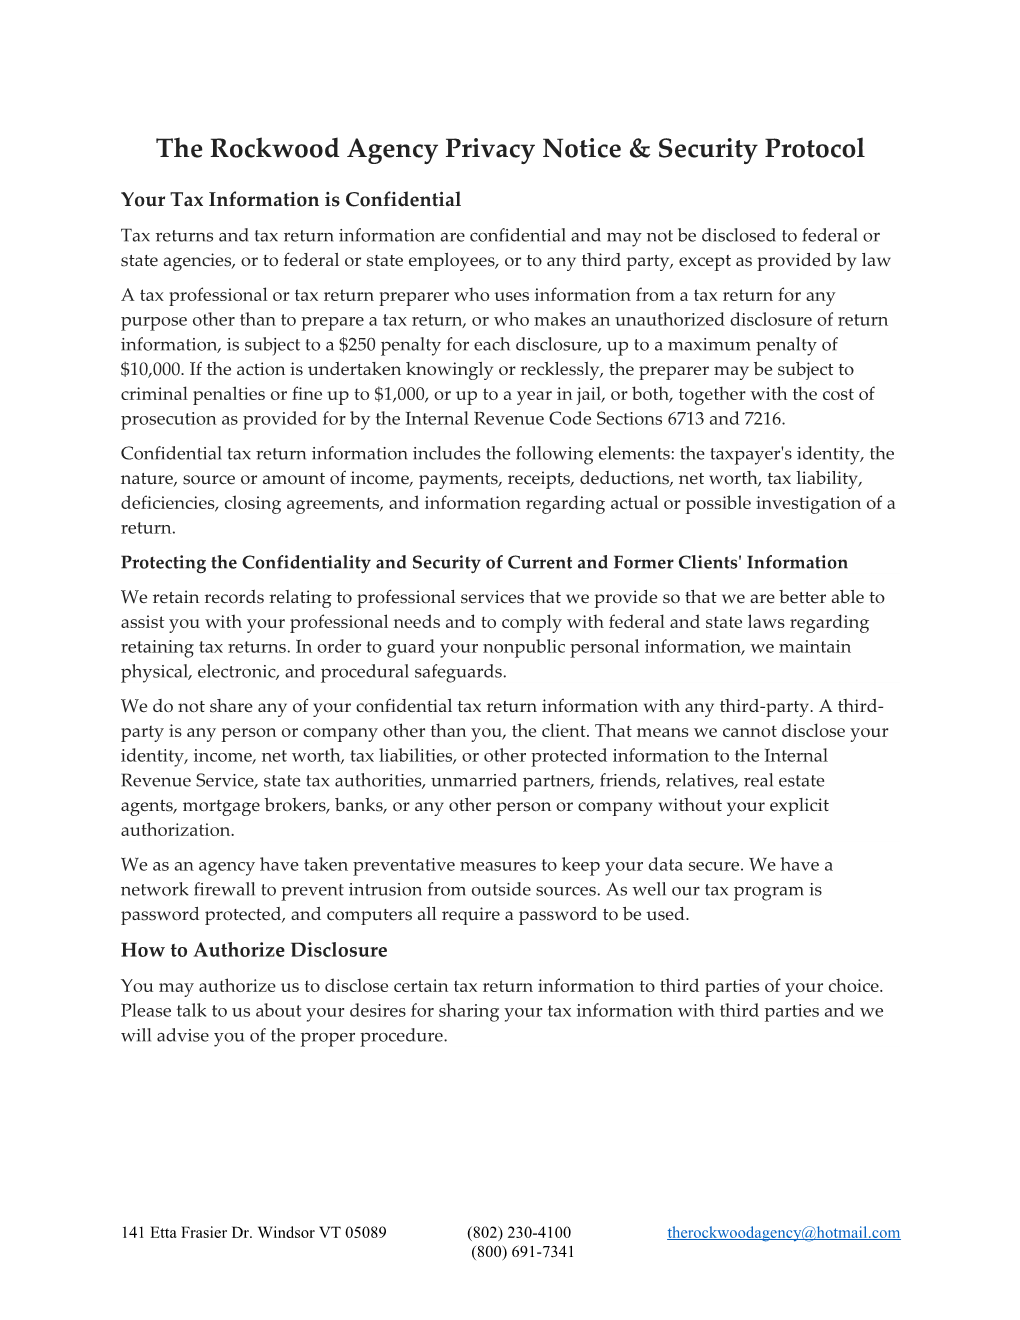 The Rockwood Agency Privacy Notice & Security Protocol